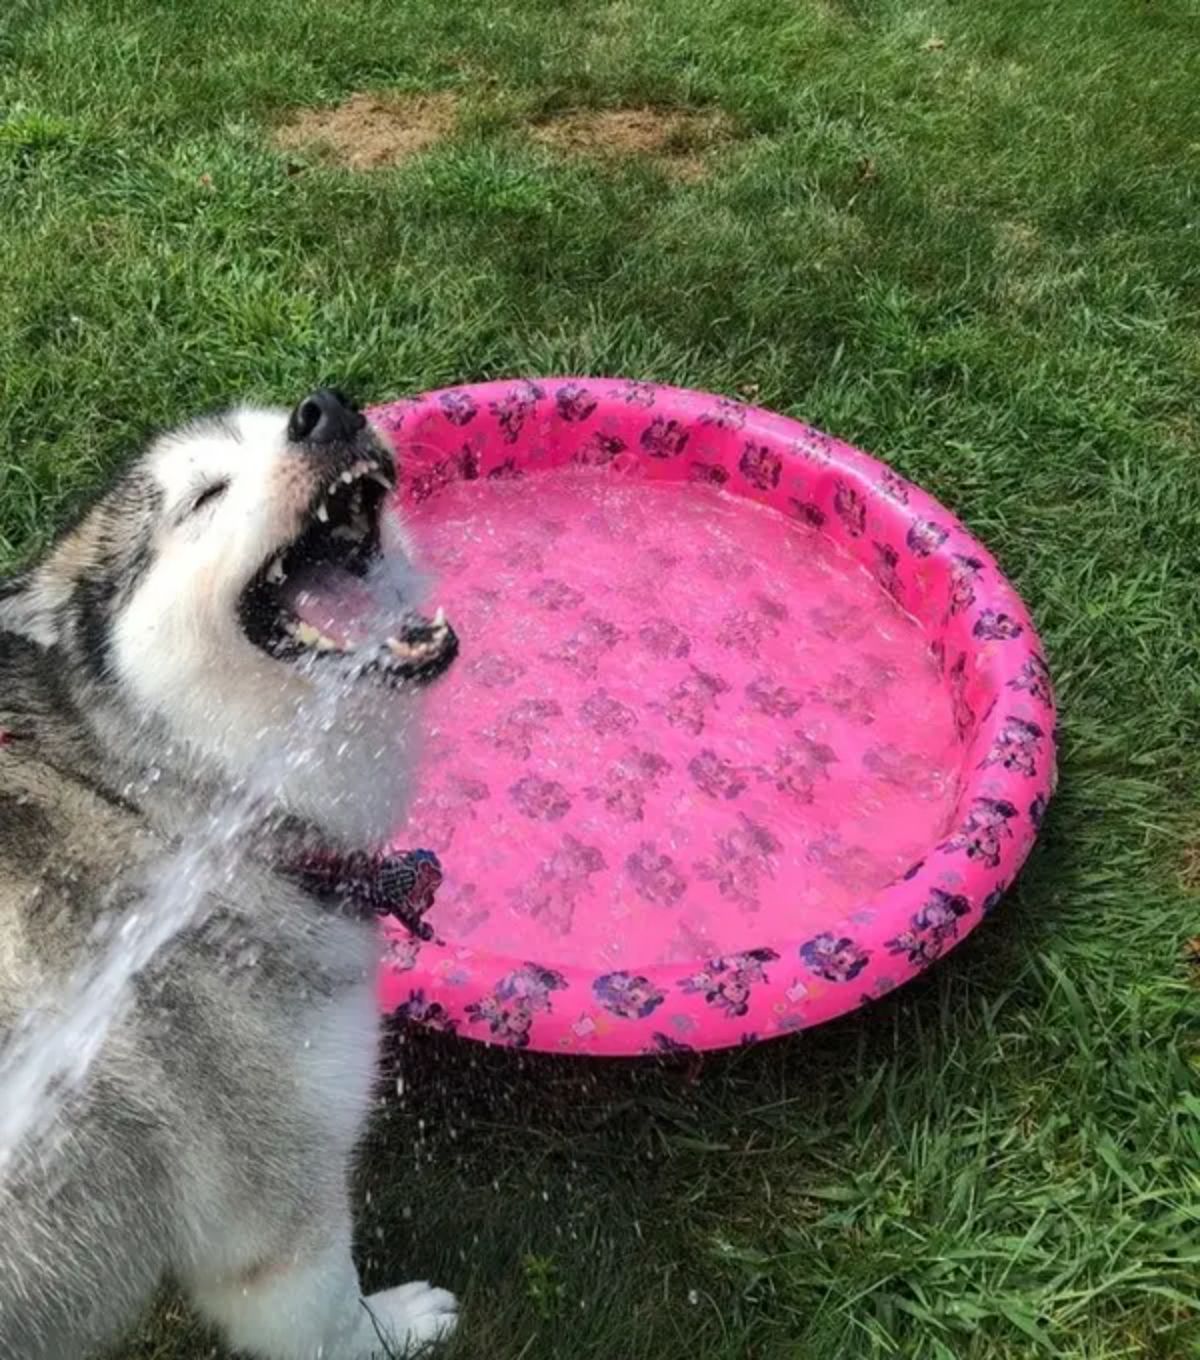 black and white husky drinking water out of a hose that's being used to fill a pink and black patterned kiddie pool on grass